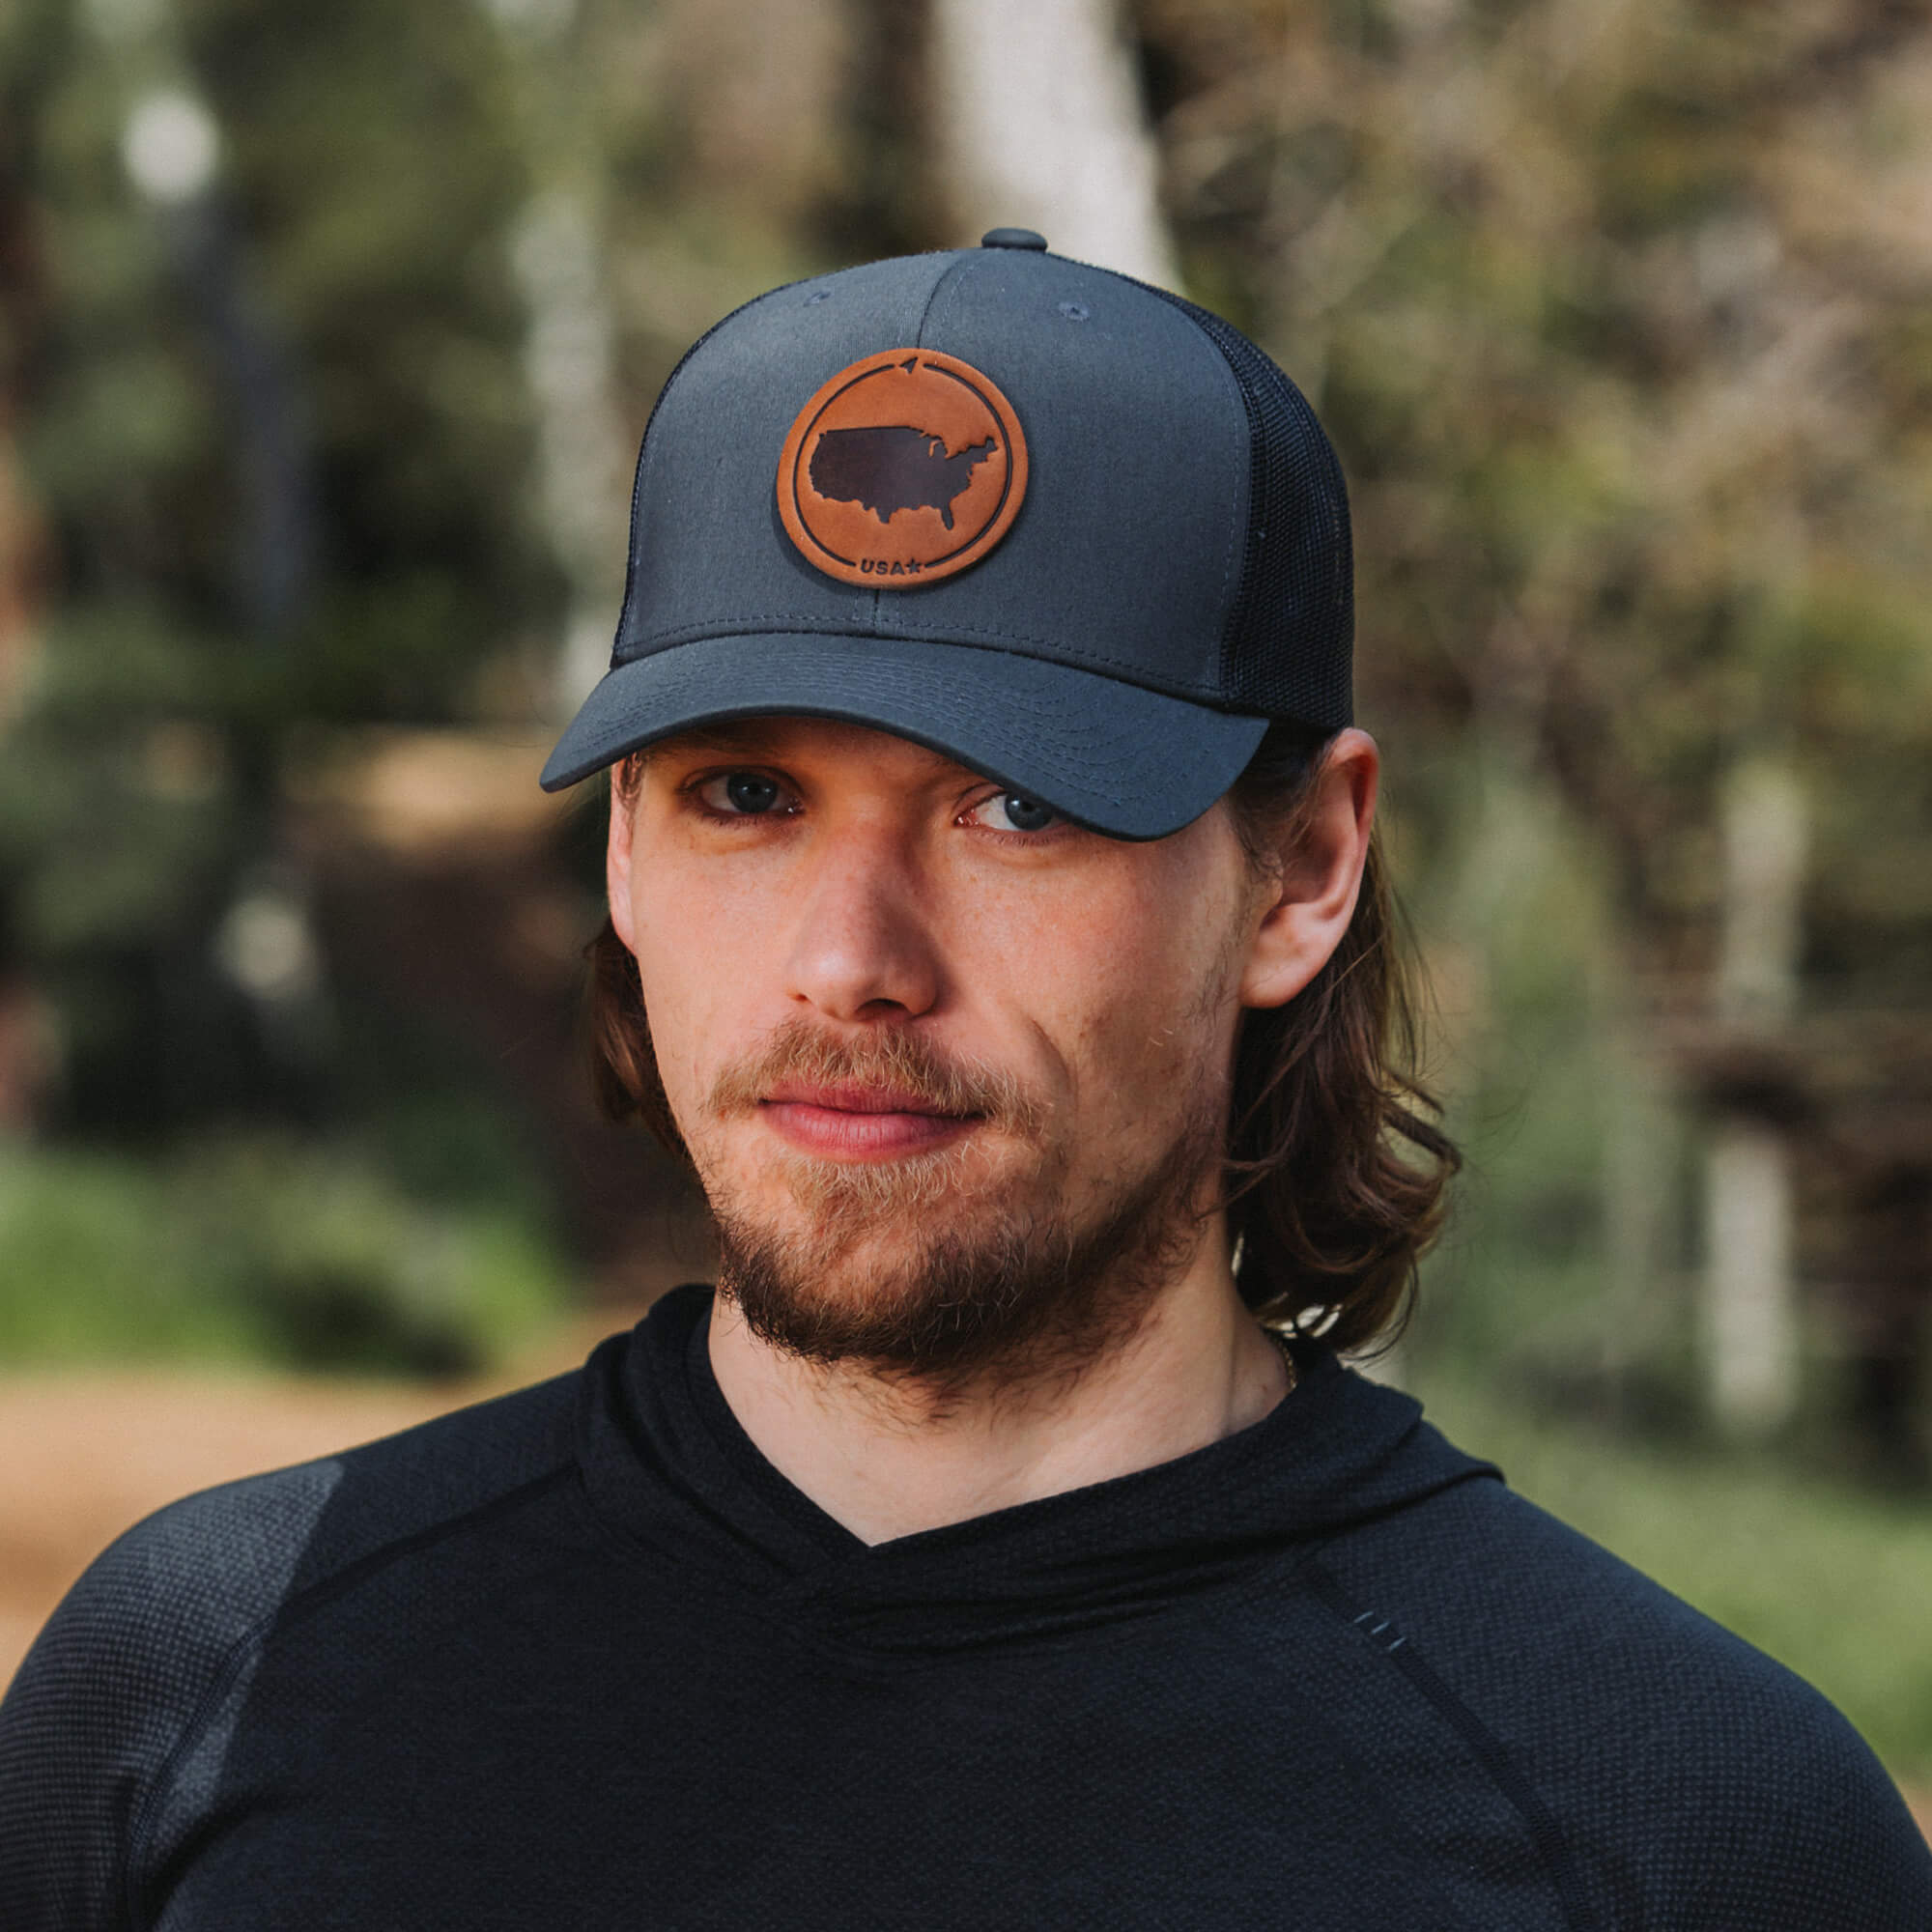 Charcoal trucker hat with full-grain leather patch of a Michigan | BLACK-003-007, CHARC-003-007, NAVY-003-007, HGREY-003-007, MOSS-003-007, BROWN-003-007